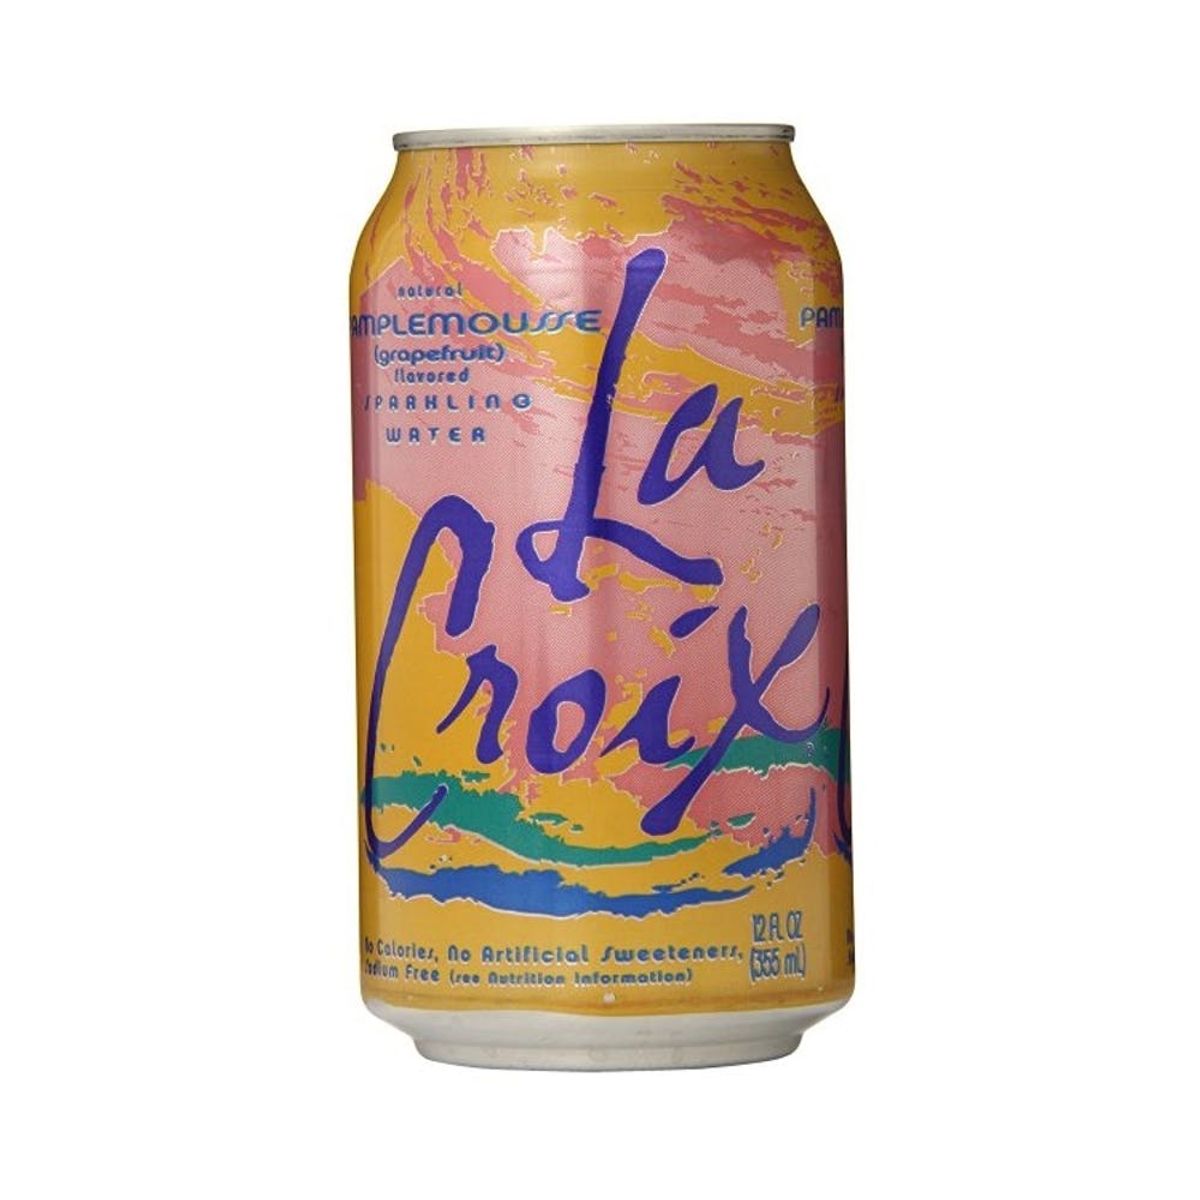 This Website Lets You Make Your Own LaCroix Cans